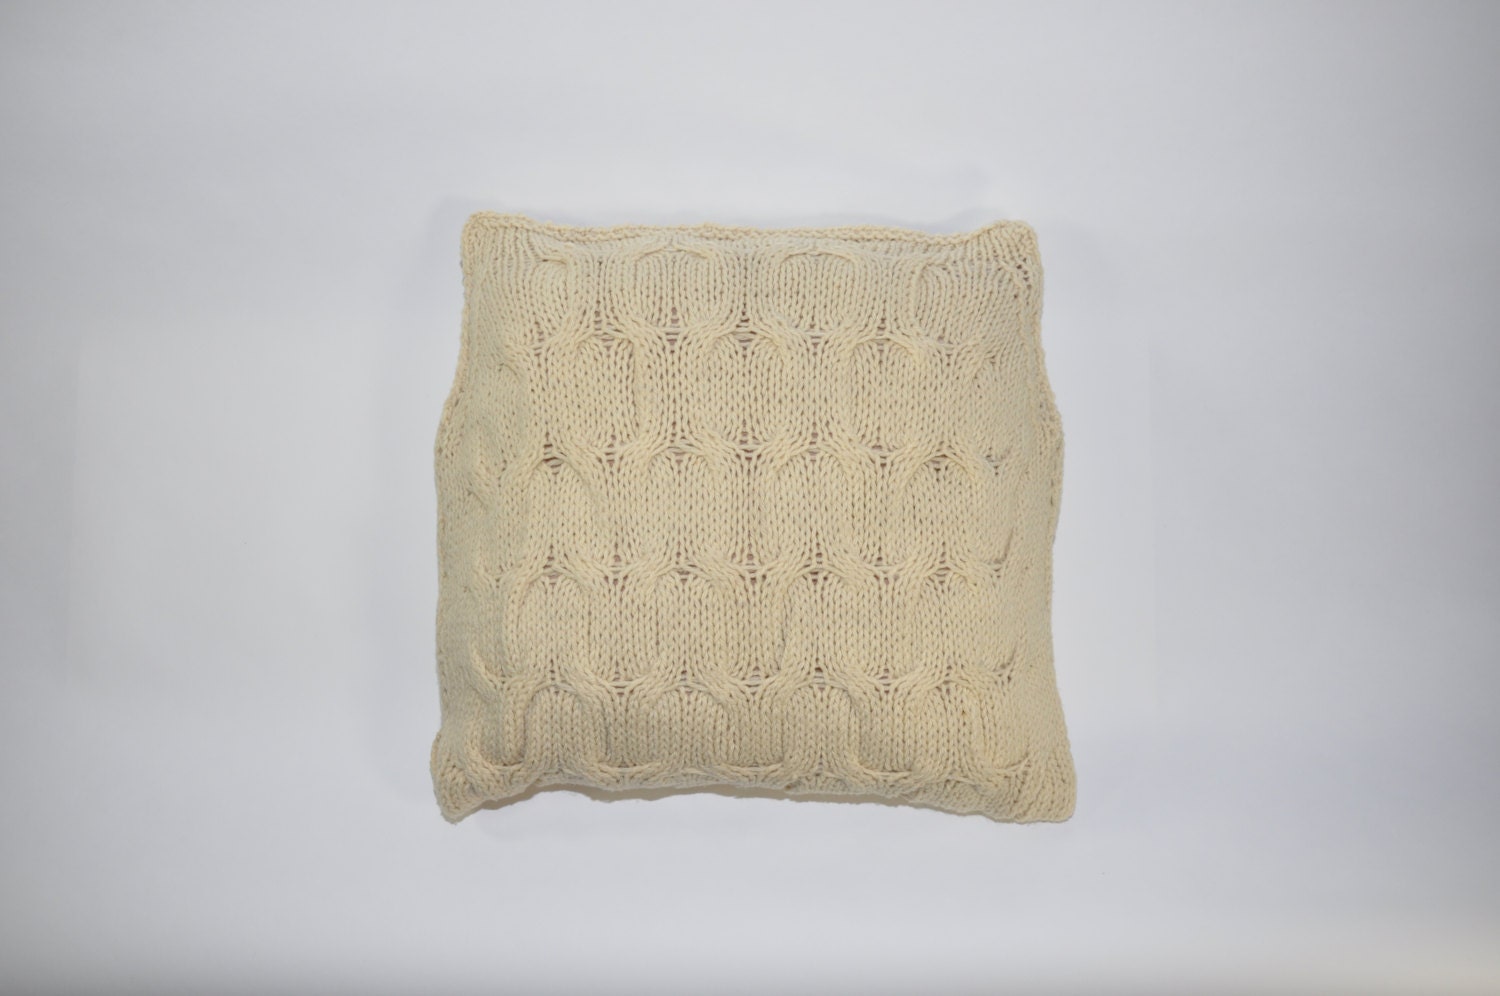 wool hand knit pillow cover / vintage cable knit pillow cover / knitted throw pillow - QuietUnrest2